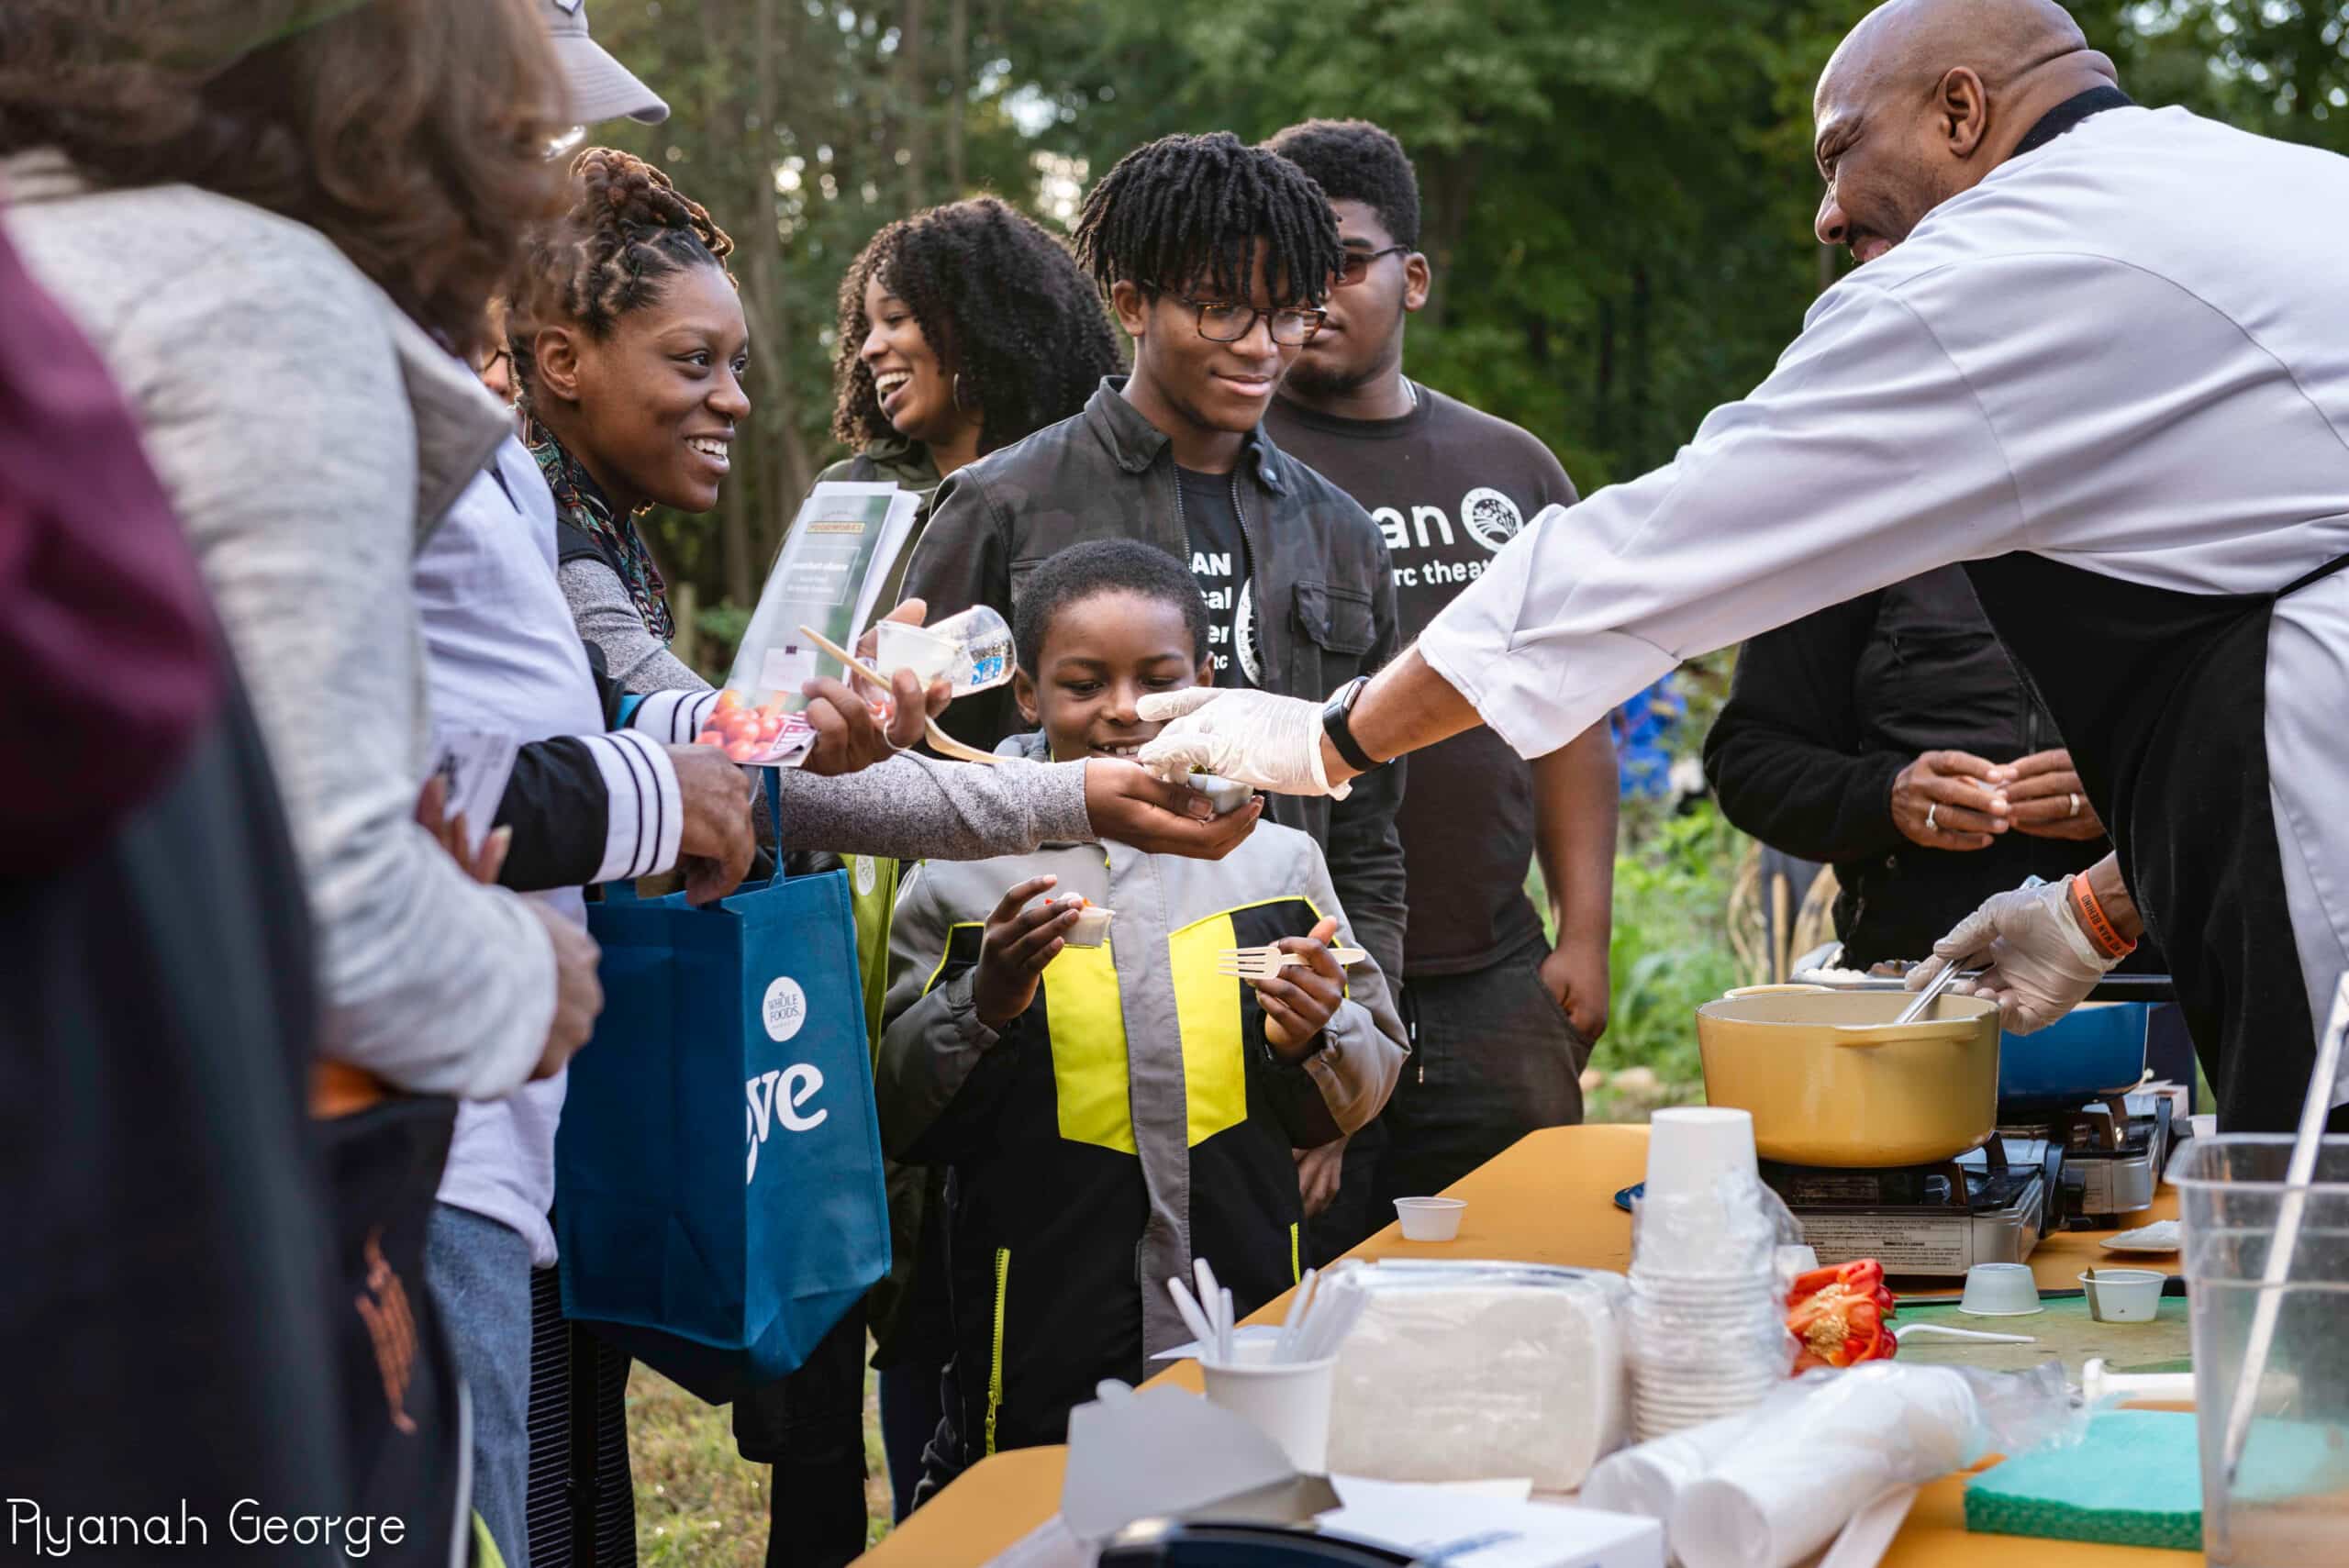 Community Events hosted by Building Bridges Across The River gather a group of people standing around a table with food.